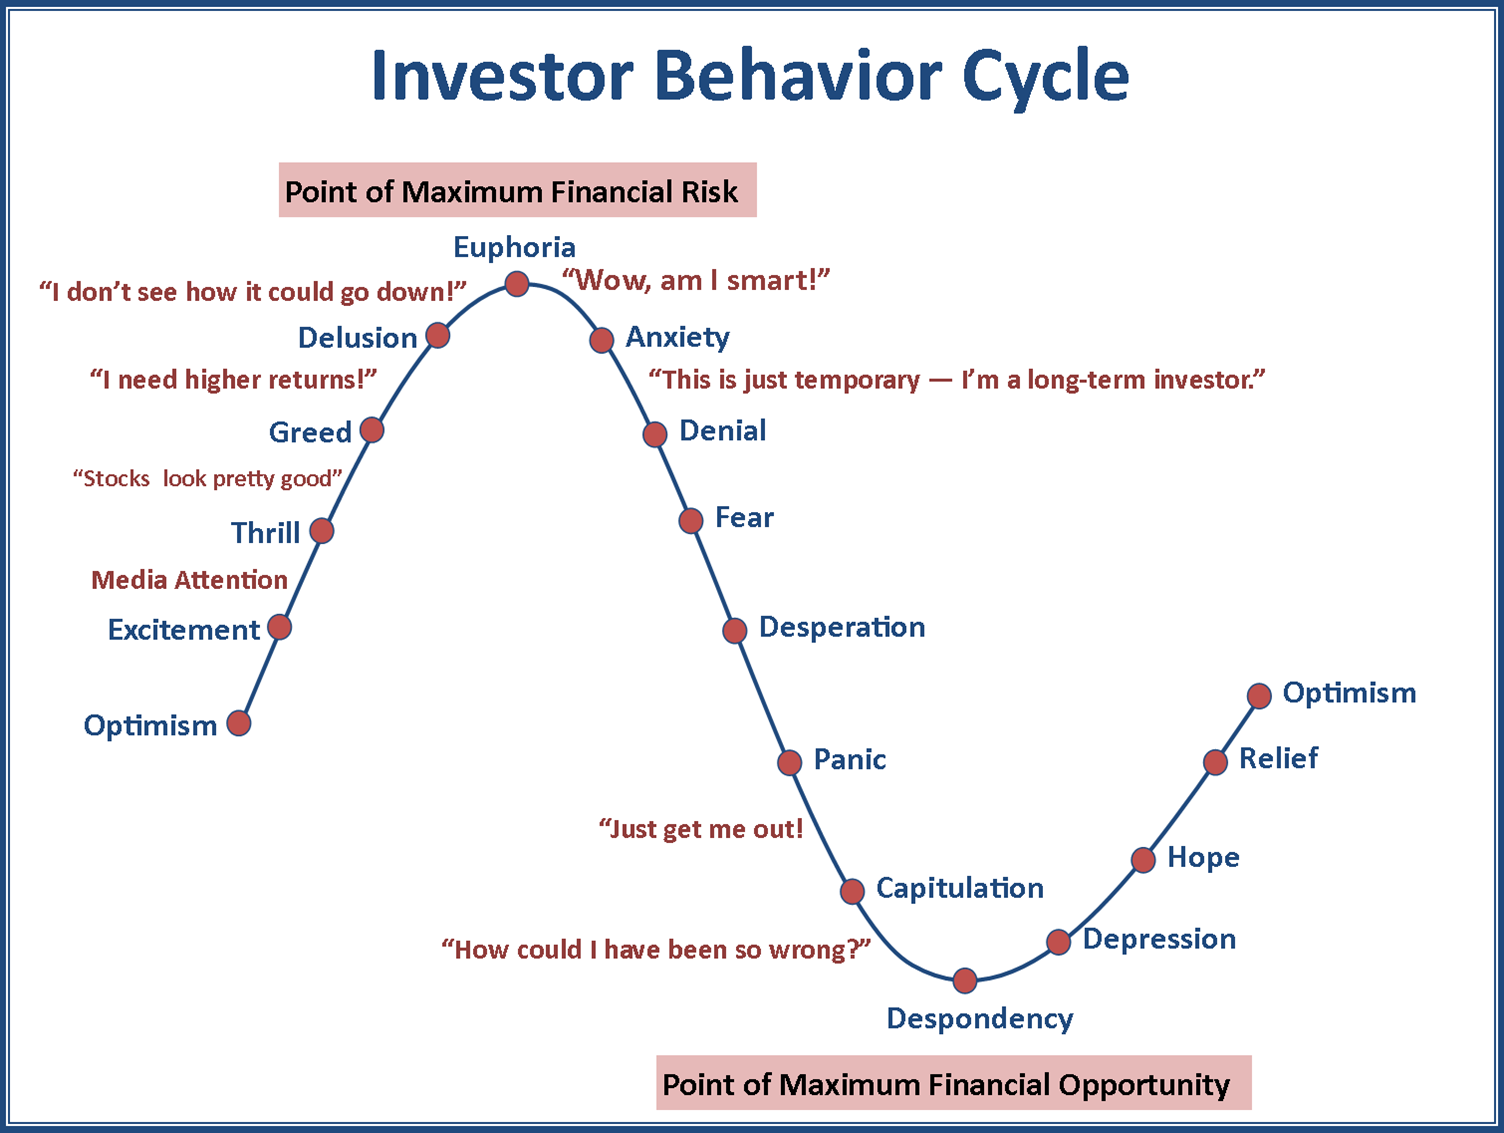 The Investor Behavior Cycle